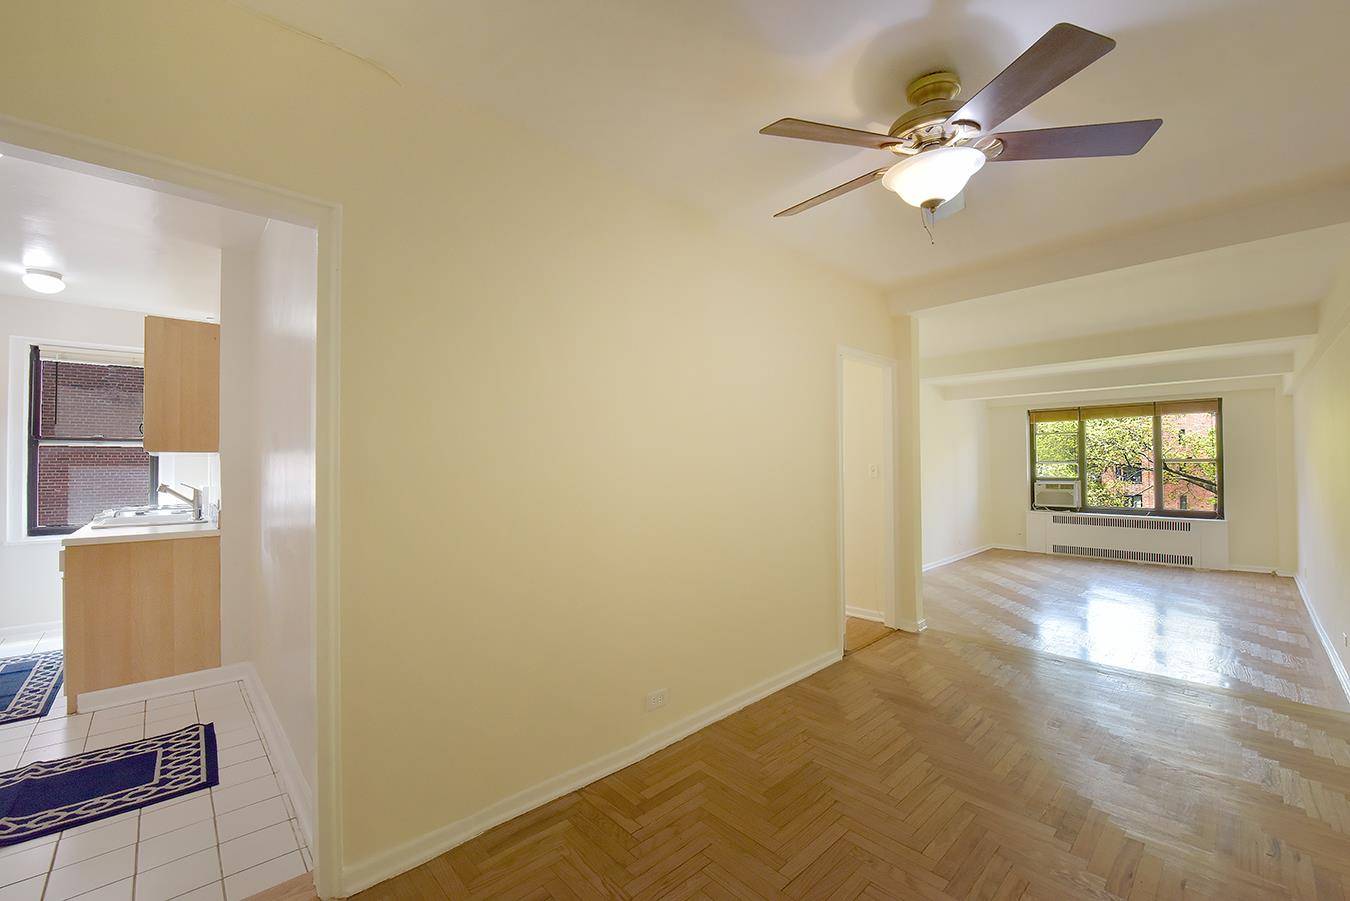 Stunning Inwood Two Bedroom with Garden Views Welcome to Inwood, where stunning natural beauty meets urban convenience.